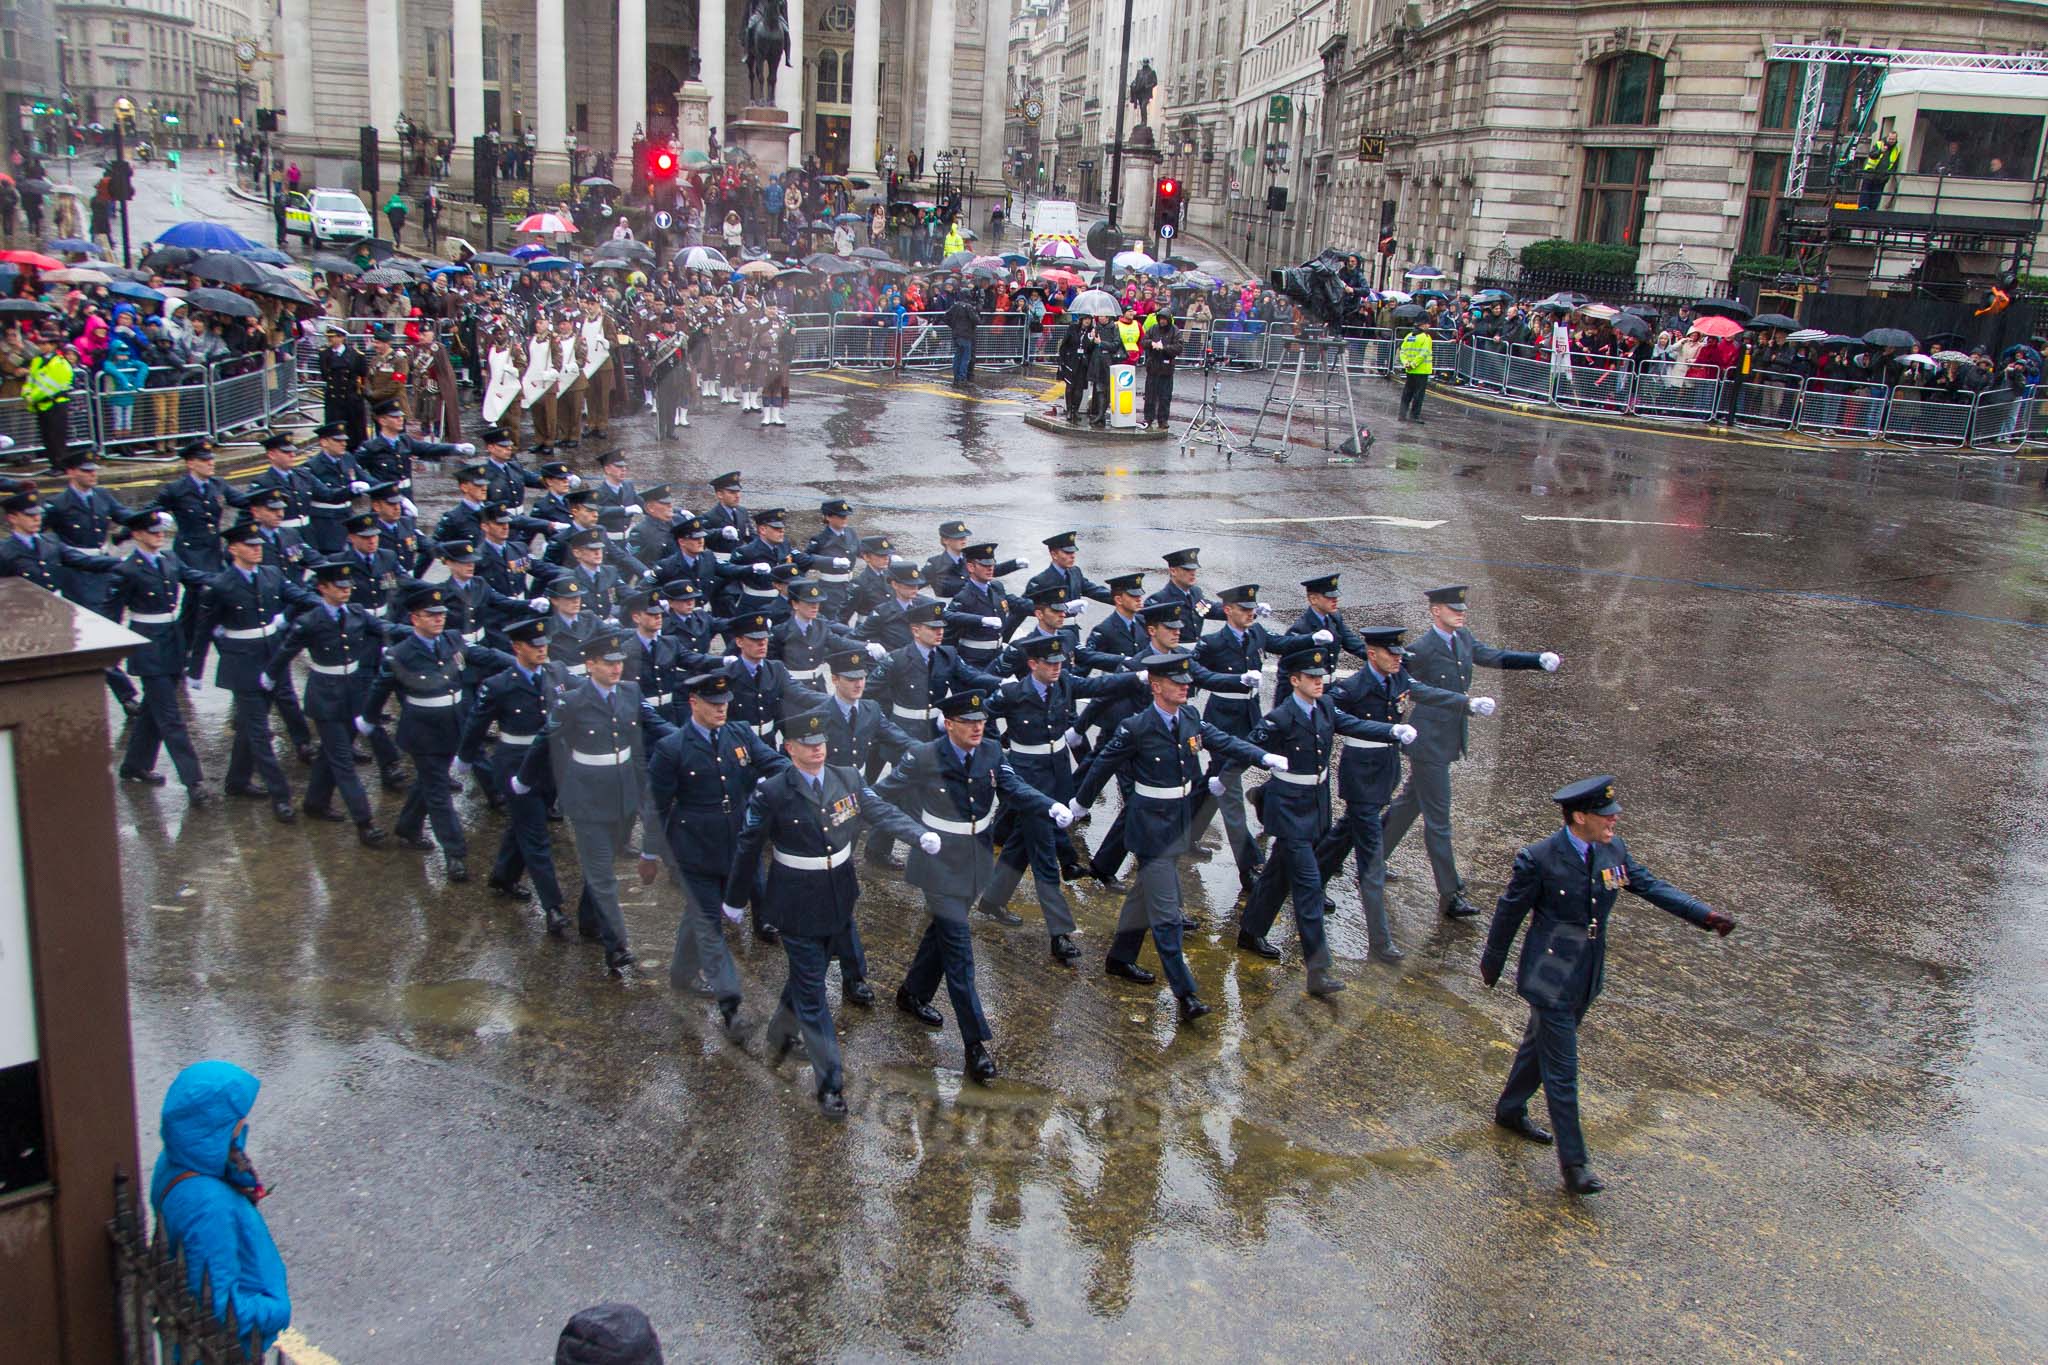 Lord Mayor's Show 2013: 16-Royal Air Force- marching contingent includes Regular and Reserve personnel..
Press stand opposite Mansion House, City of London,
London,
Greater London,
United Kingdom,
on 09 November 2013 at 11:08, image #292